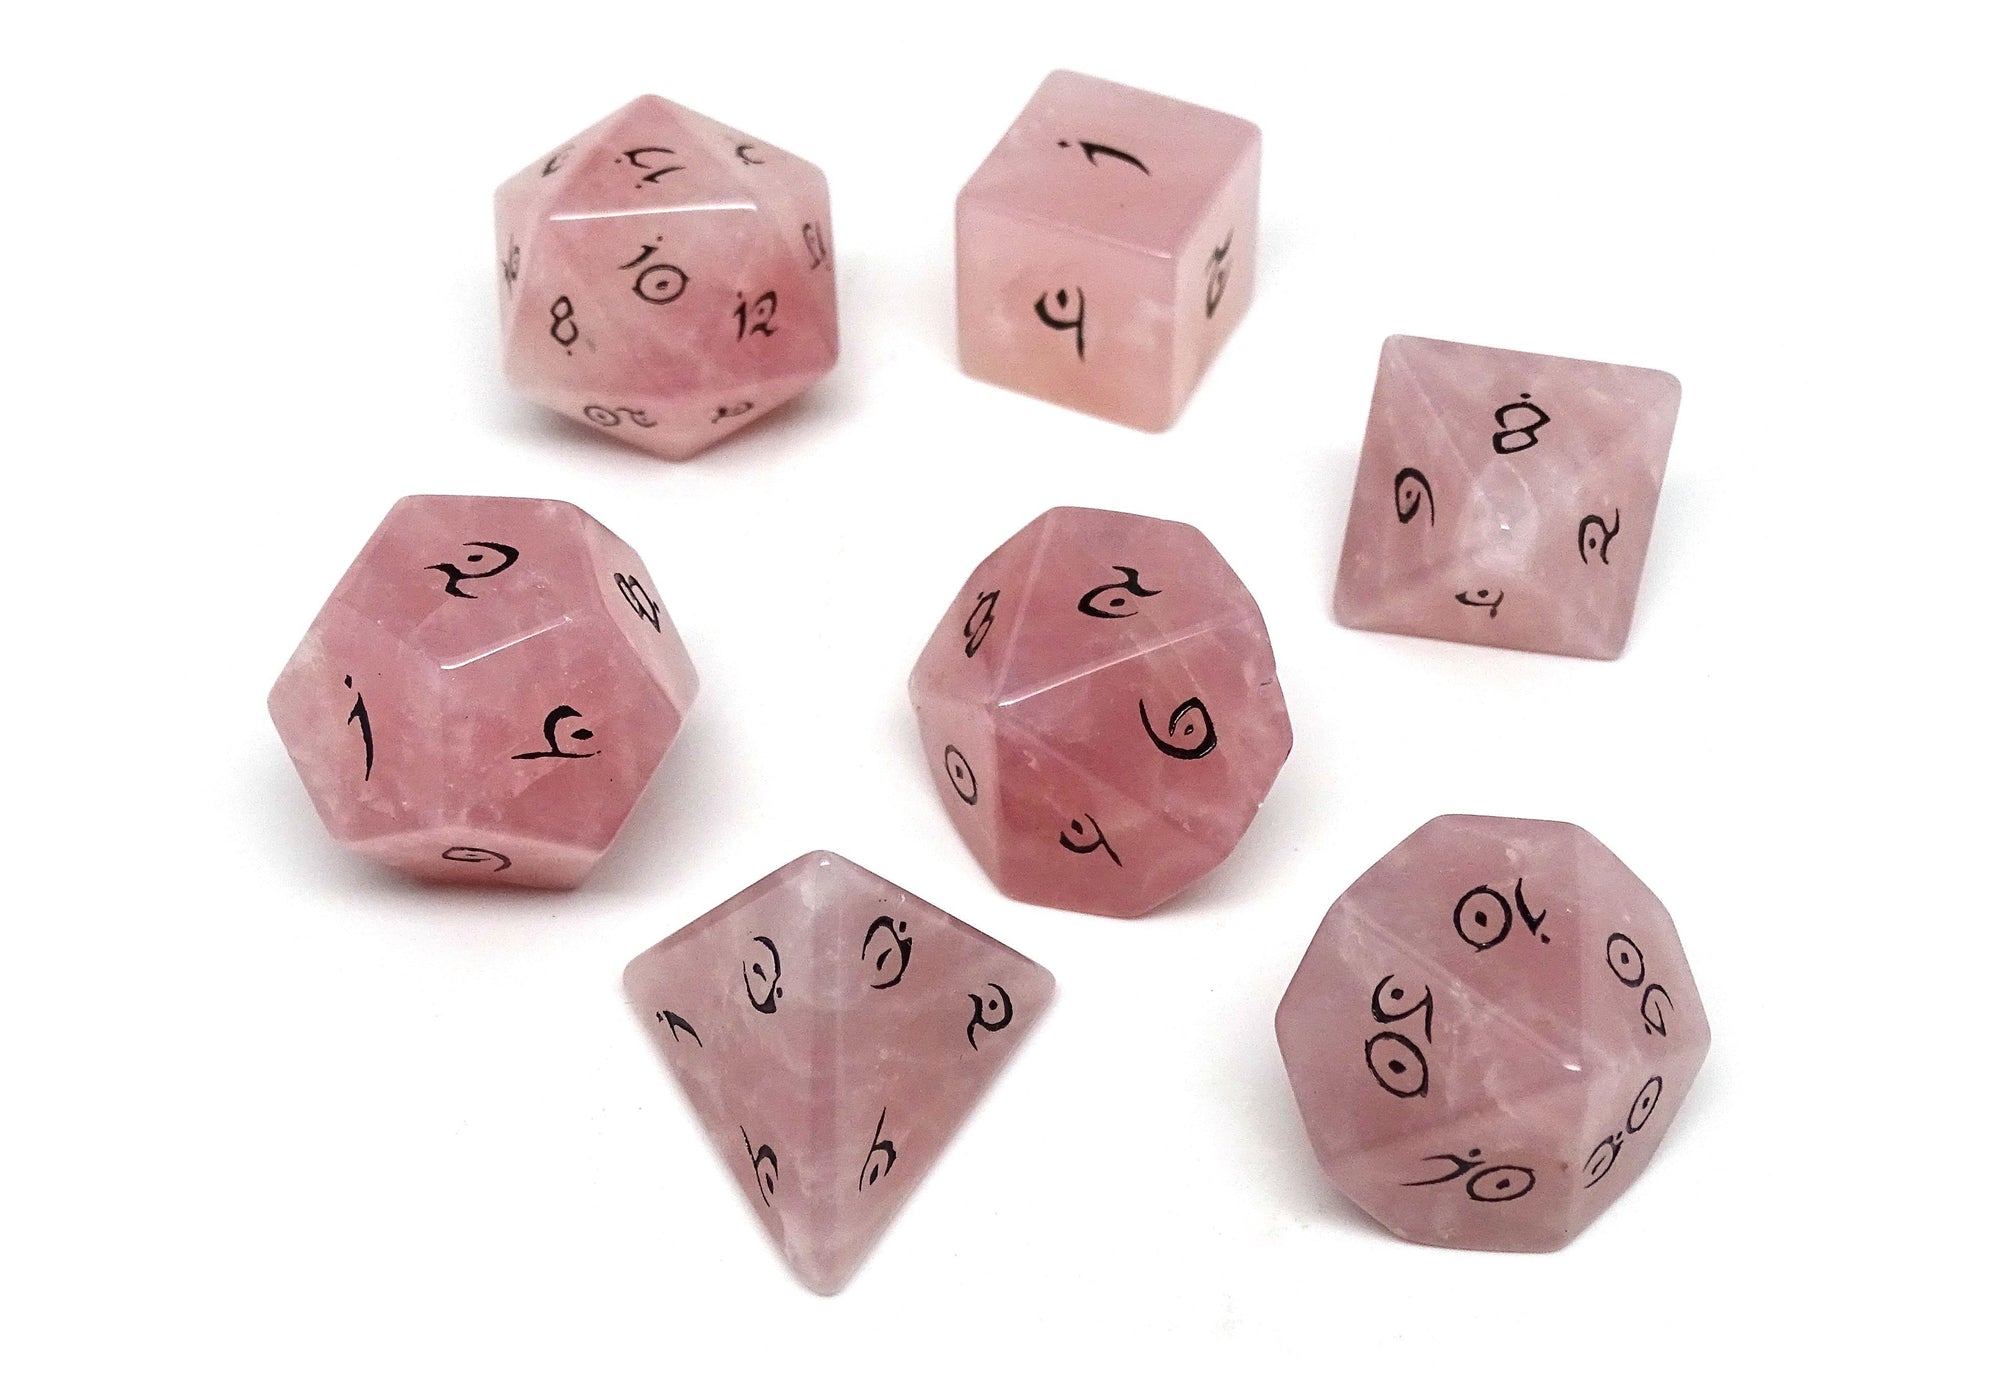 TDSO Zircon Glass Ruby with Engraved Numbers 16mm Precious Gem D4 Dice